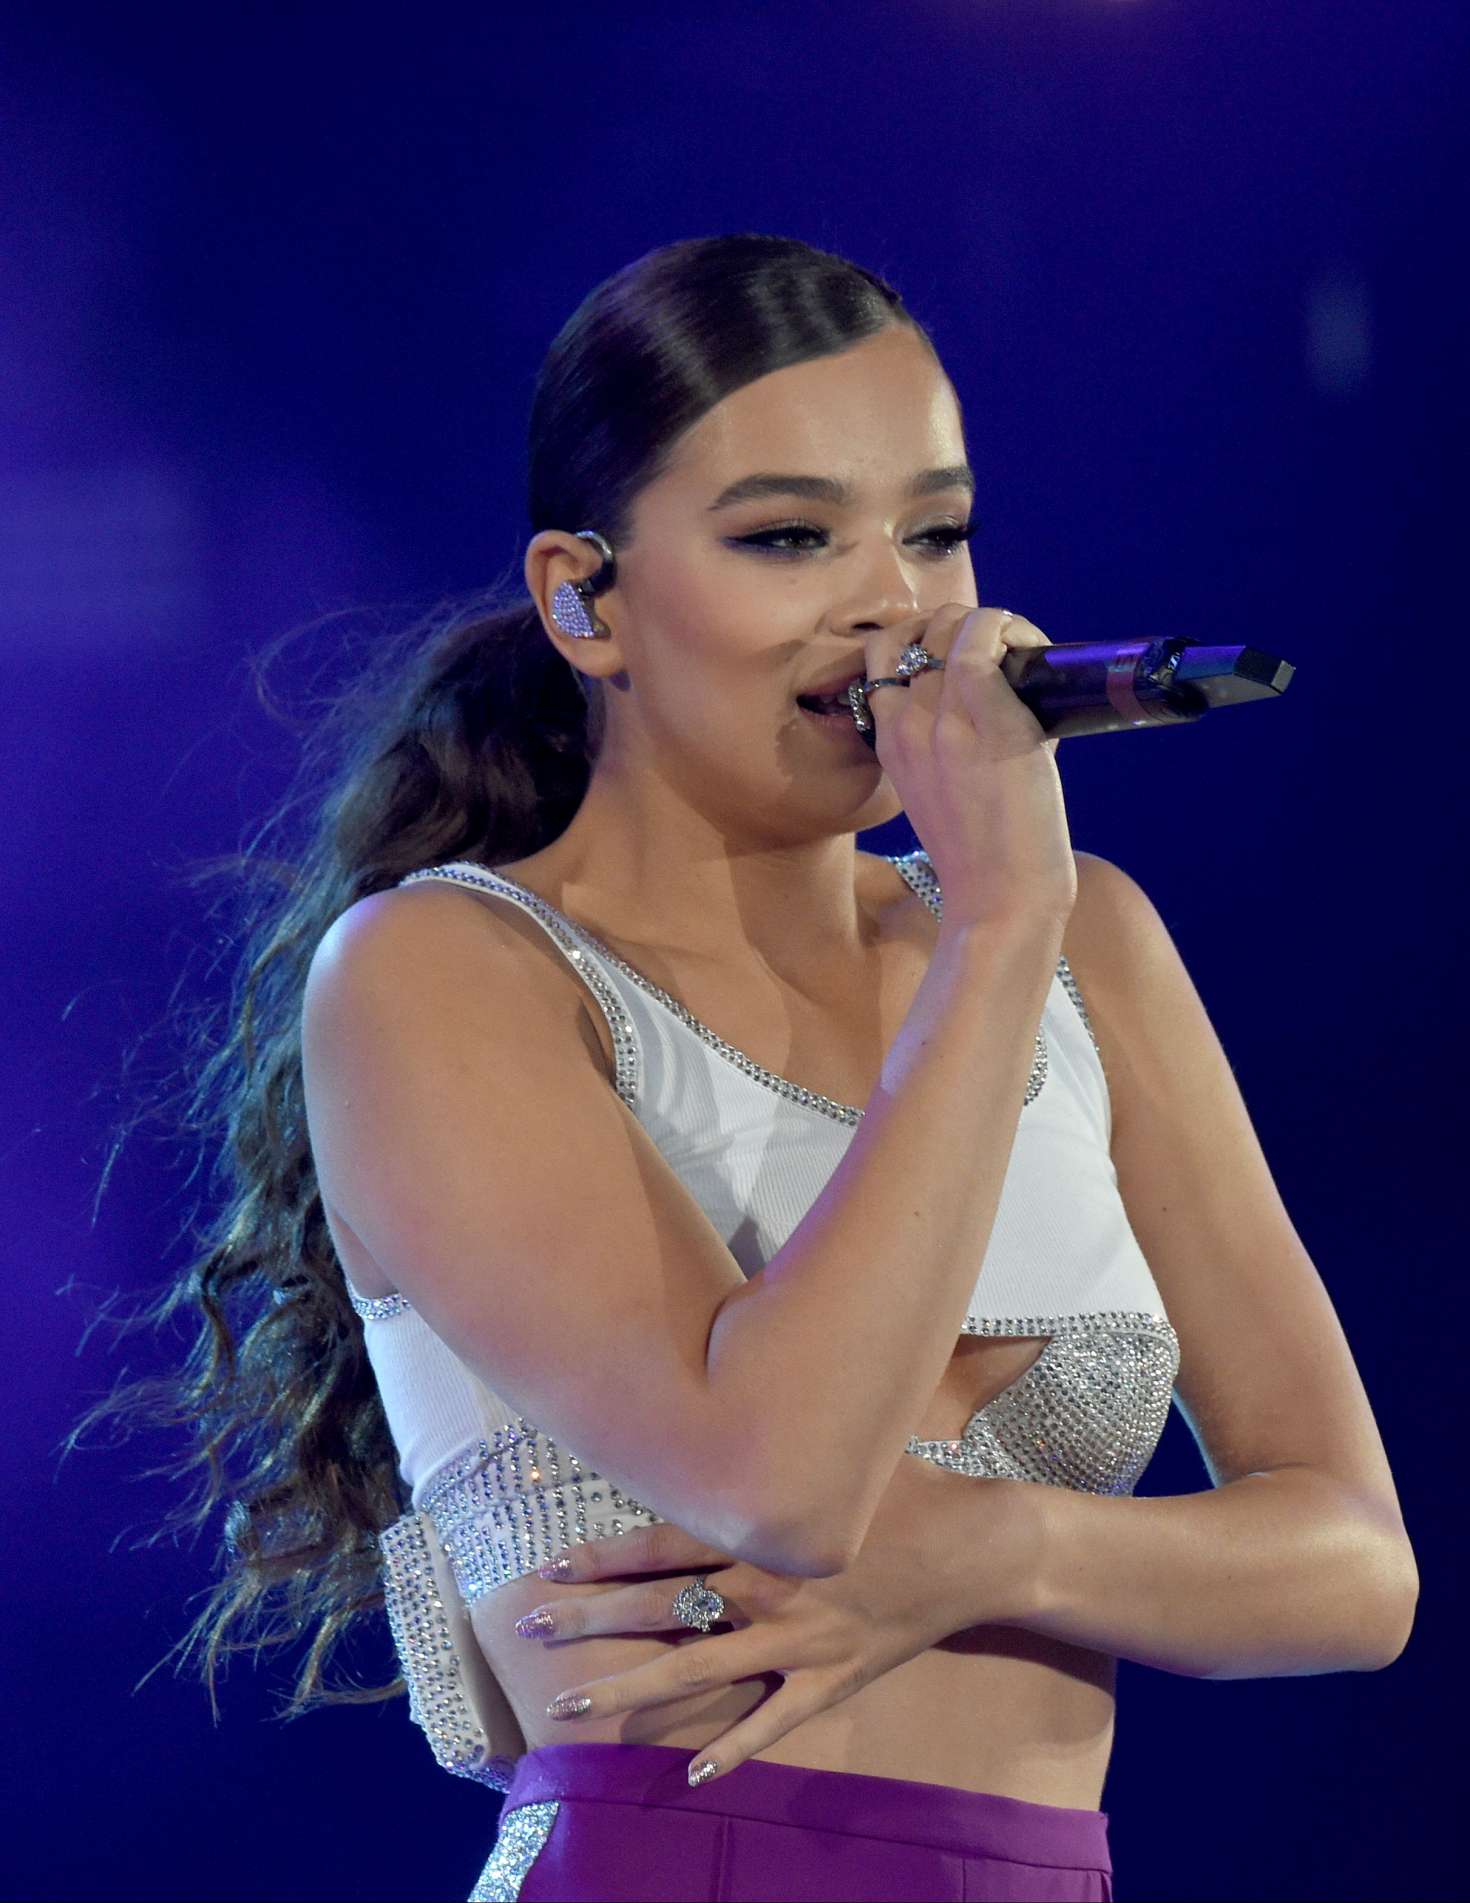 Hailee Steinfeld â€“ Performs at the Isle of MTV Concert in Malta